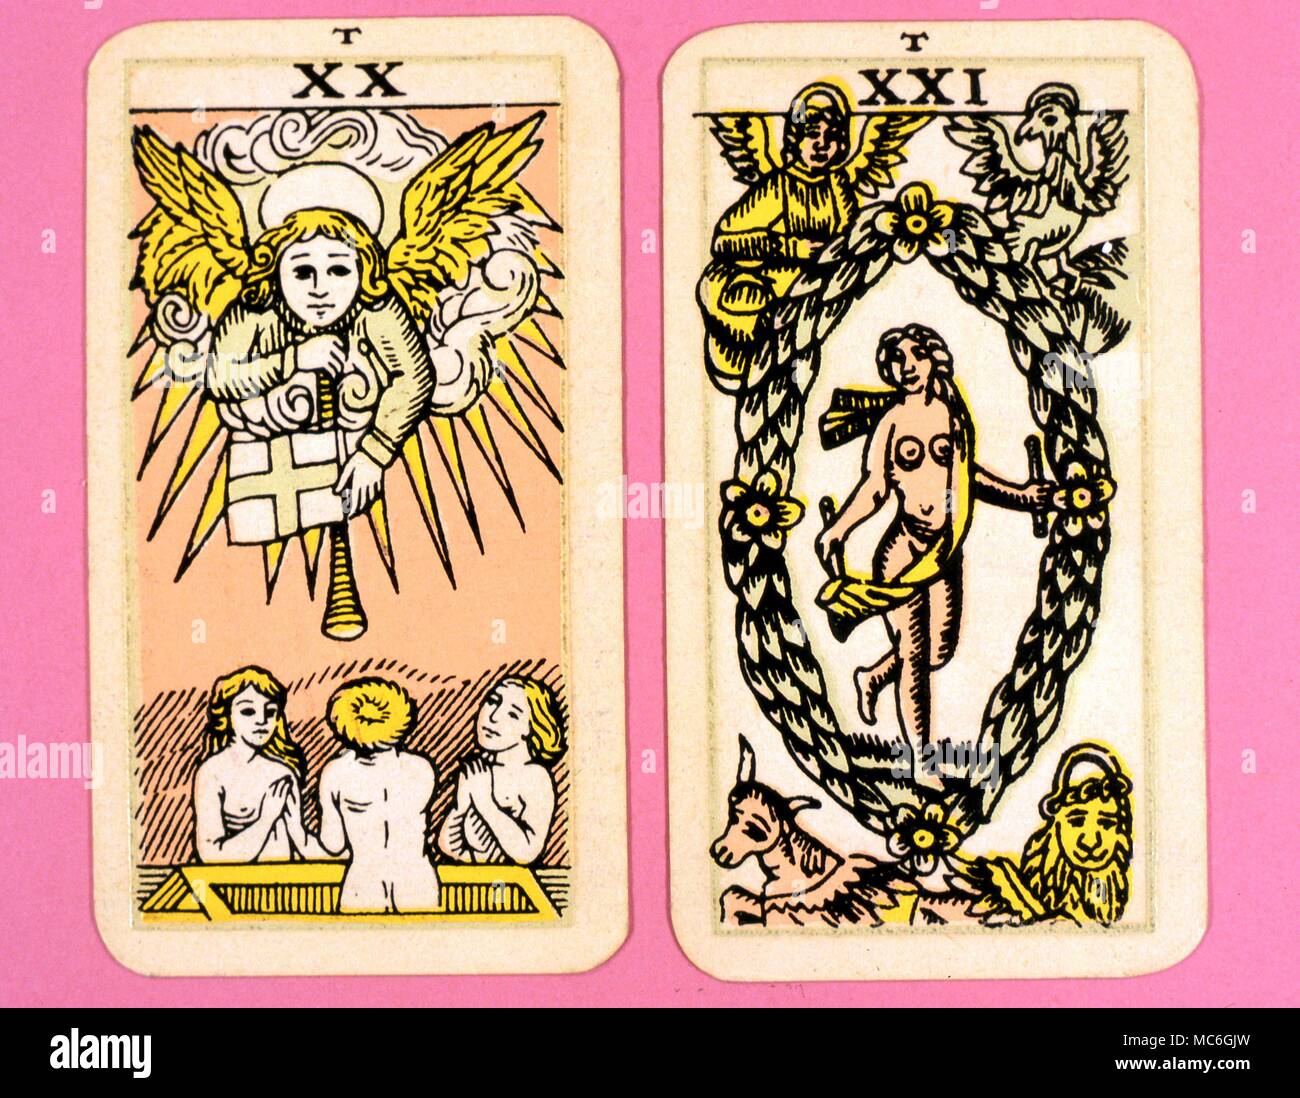 Tarot Cards-Majo Arcana- The Parisian Tarot. Card 20. The Judgement, and Card 21. The World. Two cards from a Major Arcana picture Tarot,adapted by a Wiccan group. Probably designed in an archaizing style in loose imitation of the Rosicrucian deck designed by Pamela Coleman Smith, alongside A.E.Waite, and various earlier decks, such as that published by Encausse (Papus) in The Tarot of the Bohemians at the end of the 19th century, post 1905, but earlier than 1912. The name Parisian Tarot was given by the owner of the deck - it might however be called the Tau Tarot, from the intriguing letter Stock Photo